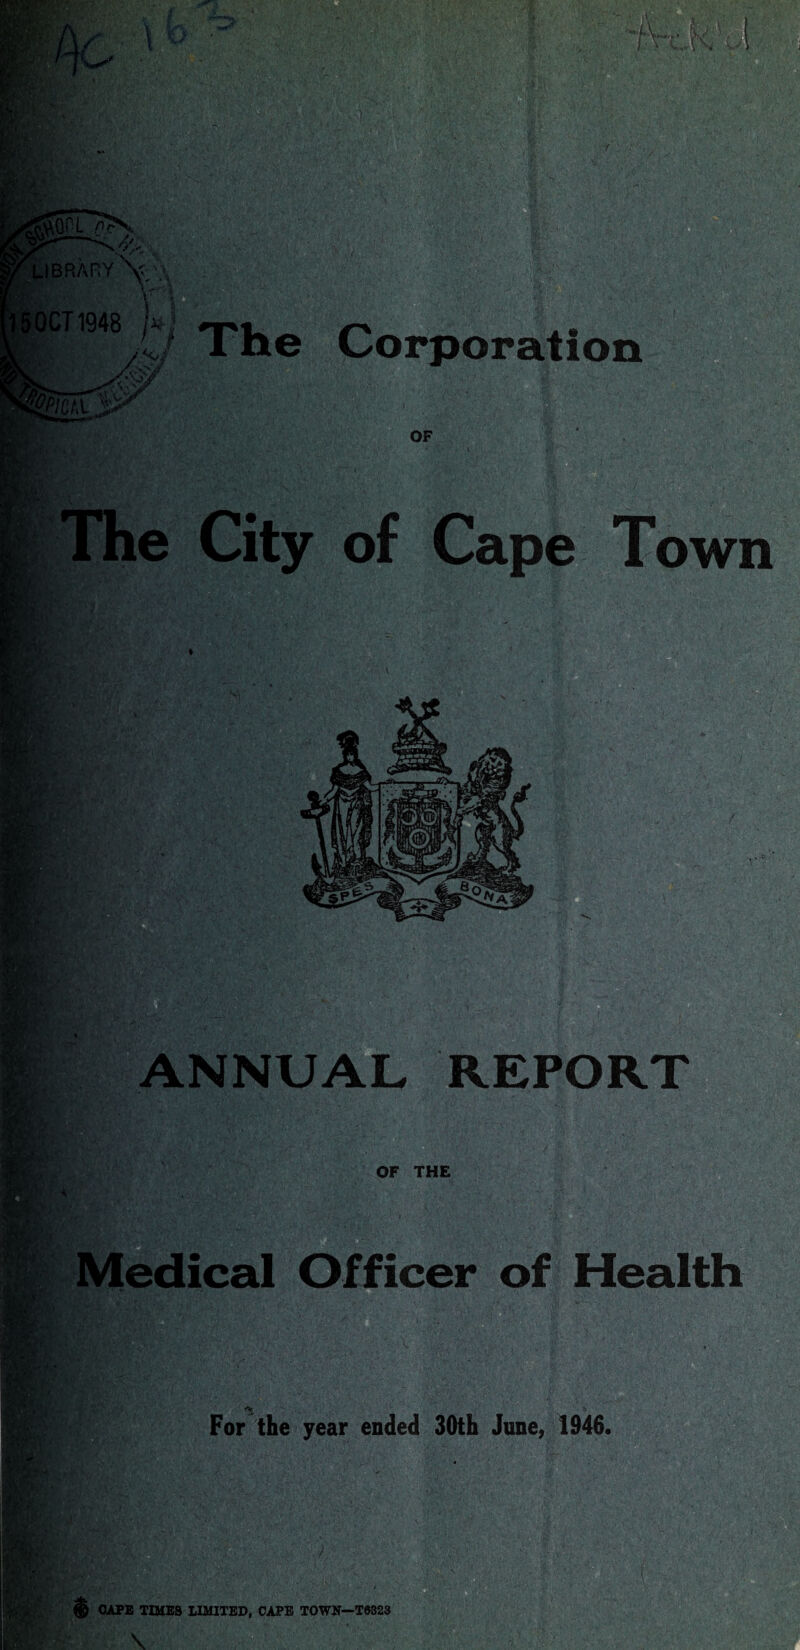 ’• • -'MM life ICT1948 Corporation OF The City of Cape Town K >r .... §1 ' V. 'Jfti/ . . .r-jtavf; REPORT OF THE Officer of Health m.} For the year ended 30th June, 1946. ® CAPE TIMES LIMITED, CAPE TOWN—T0323 \